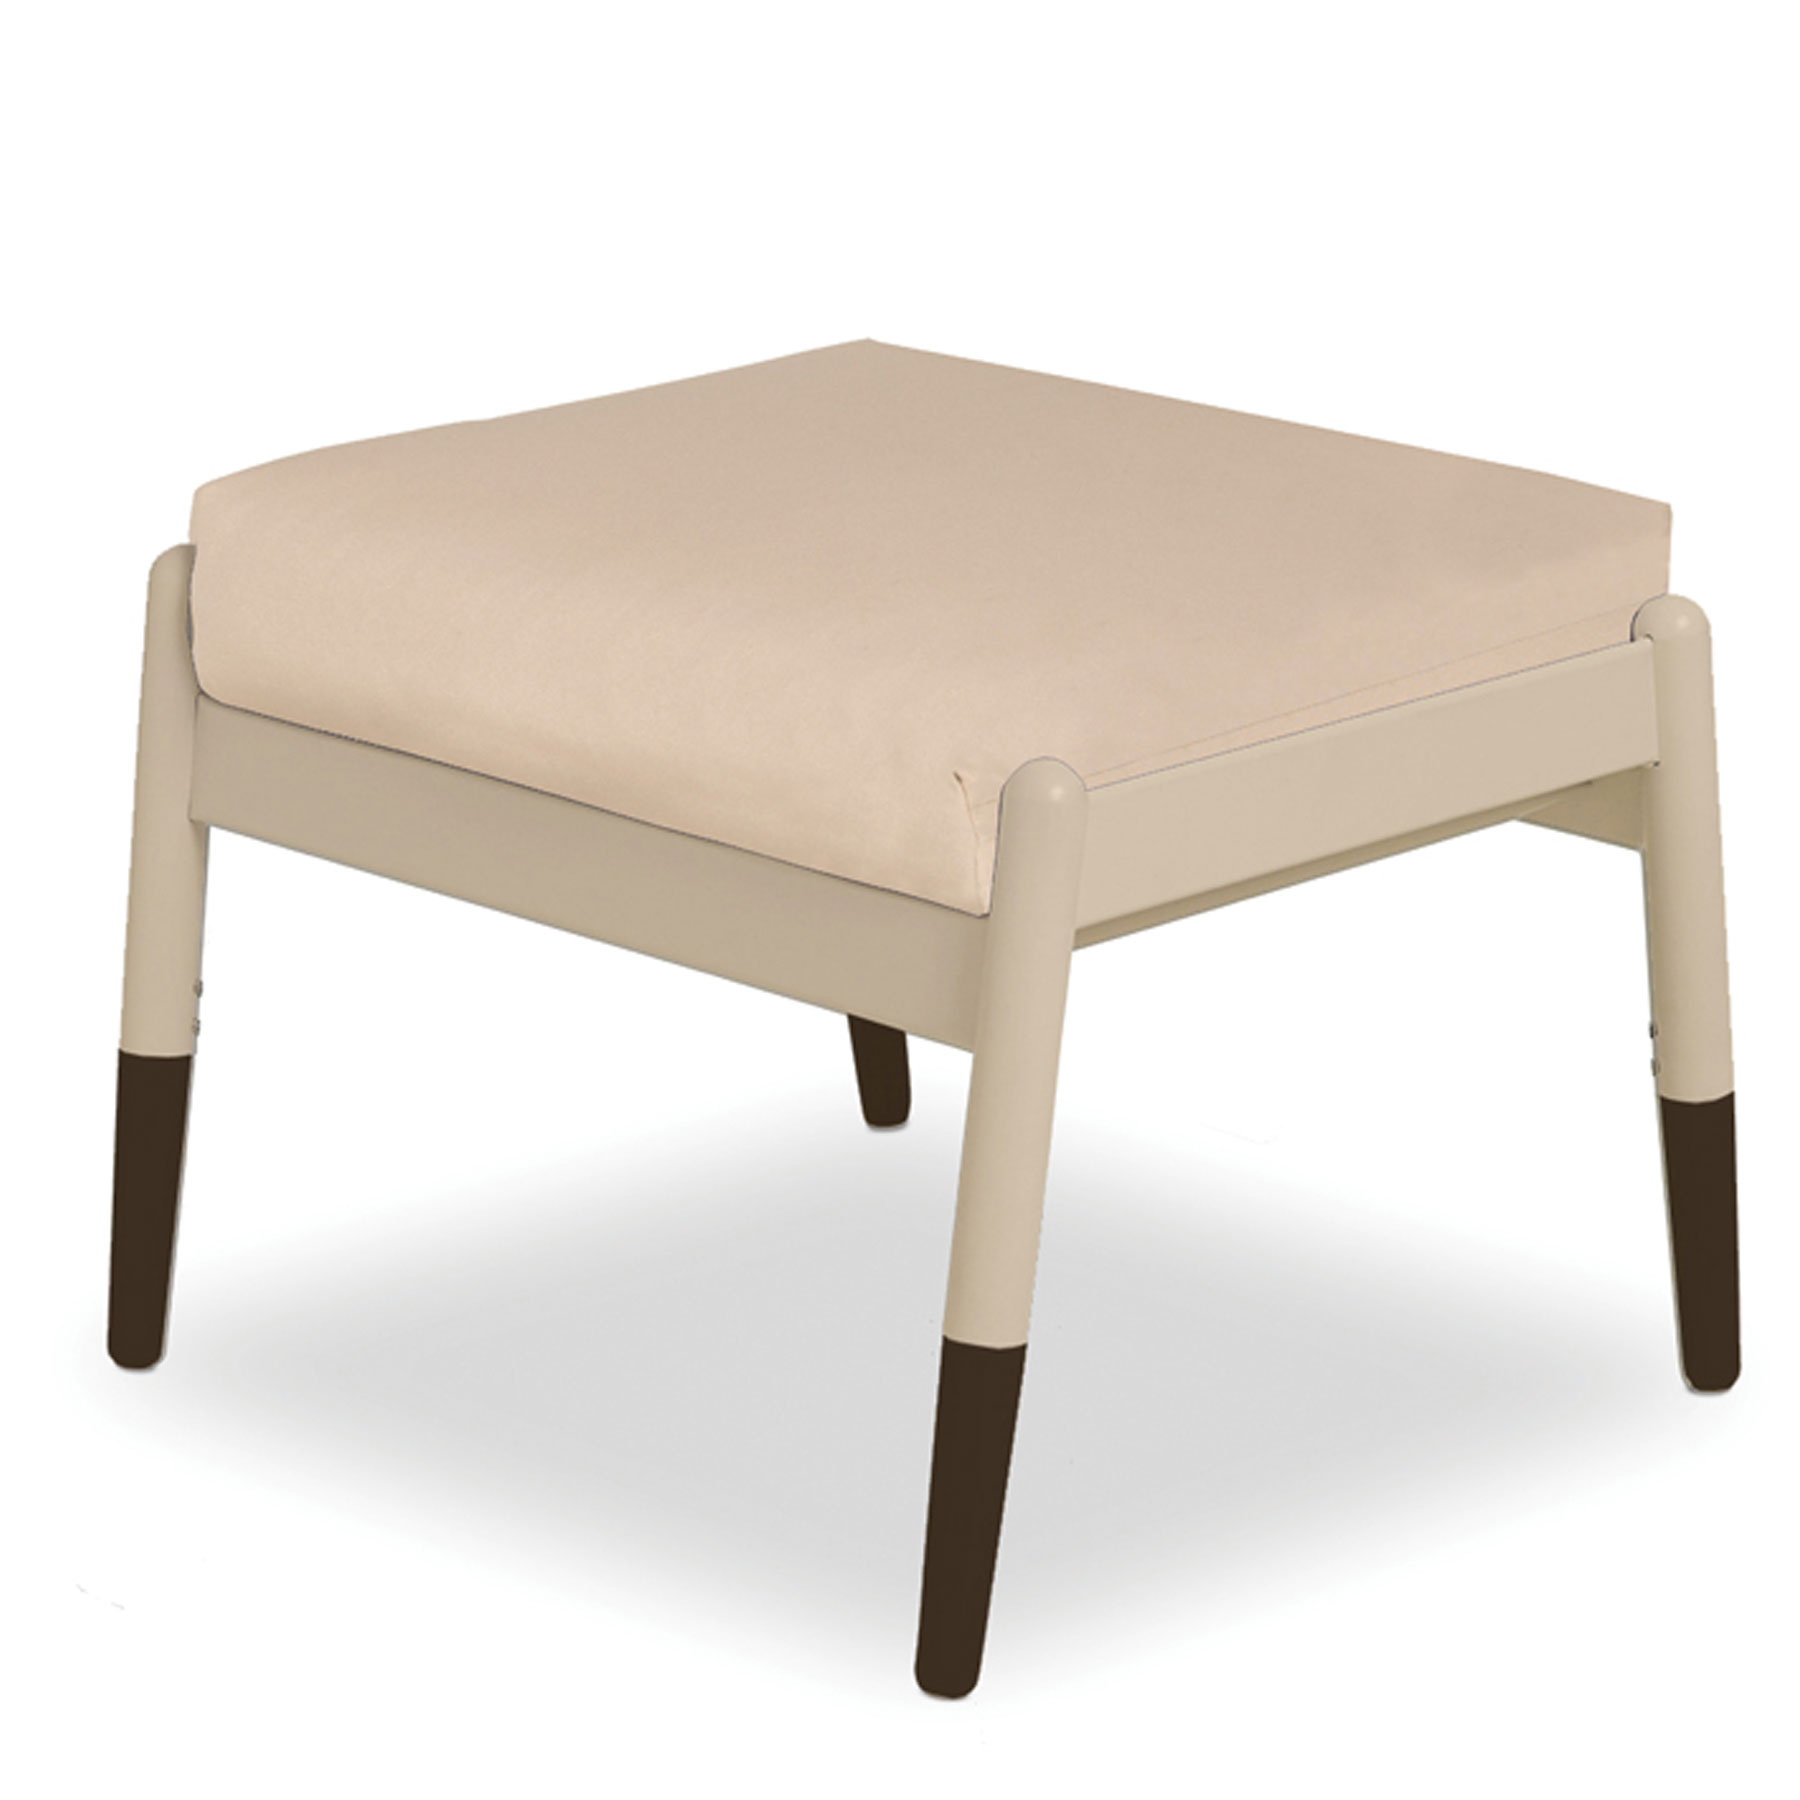 Telescope Casual Welles Cushion Ottoman without Welting